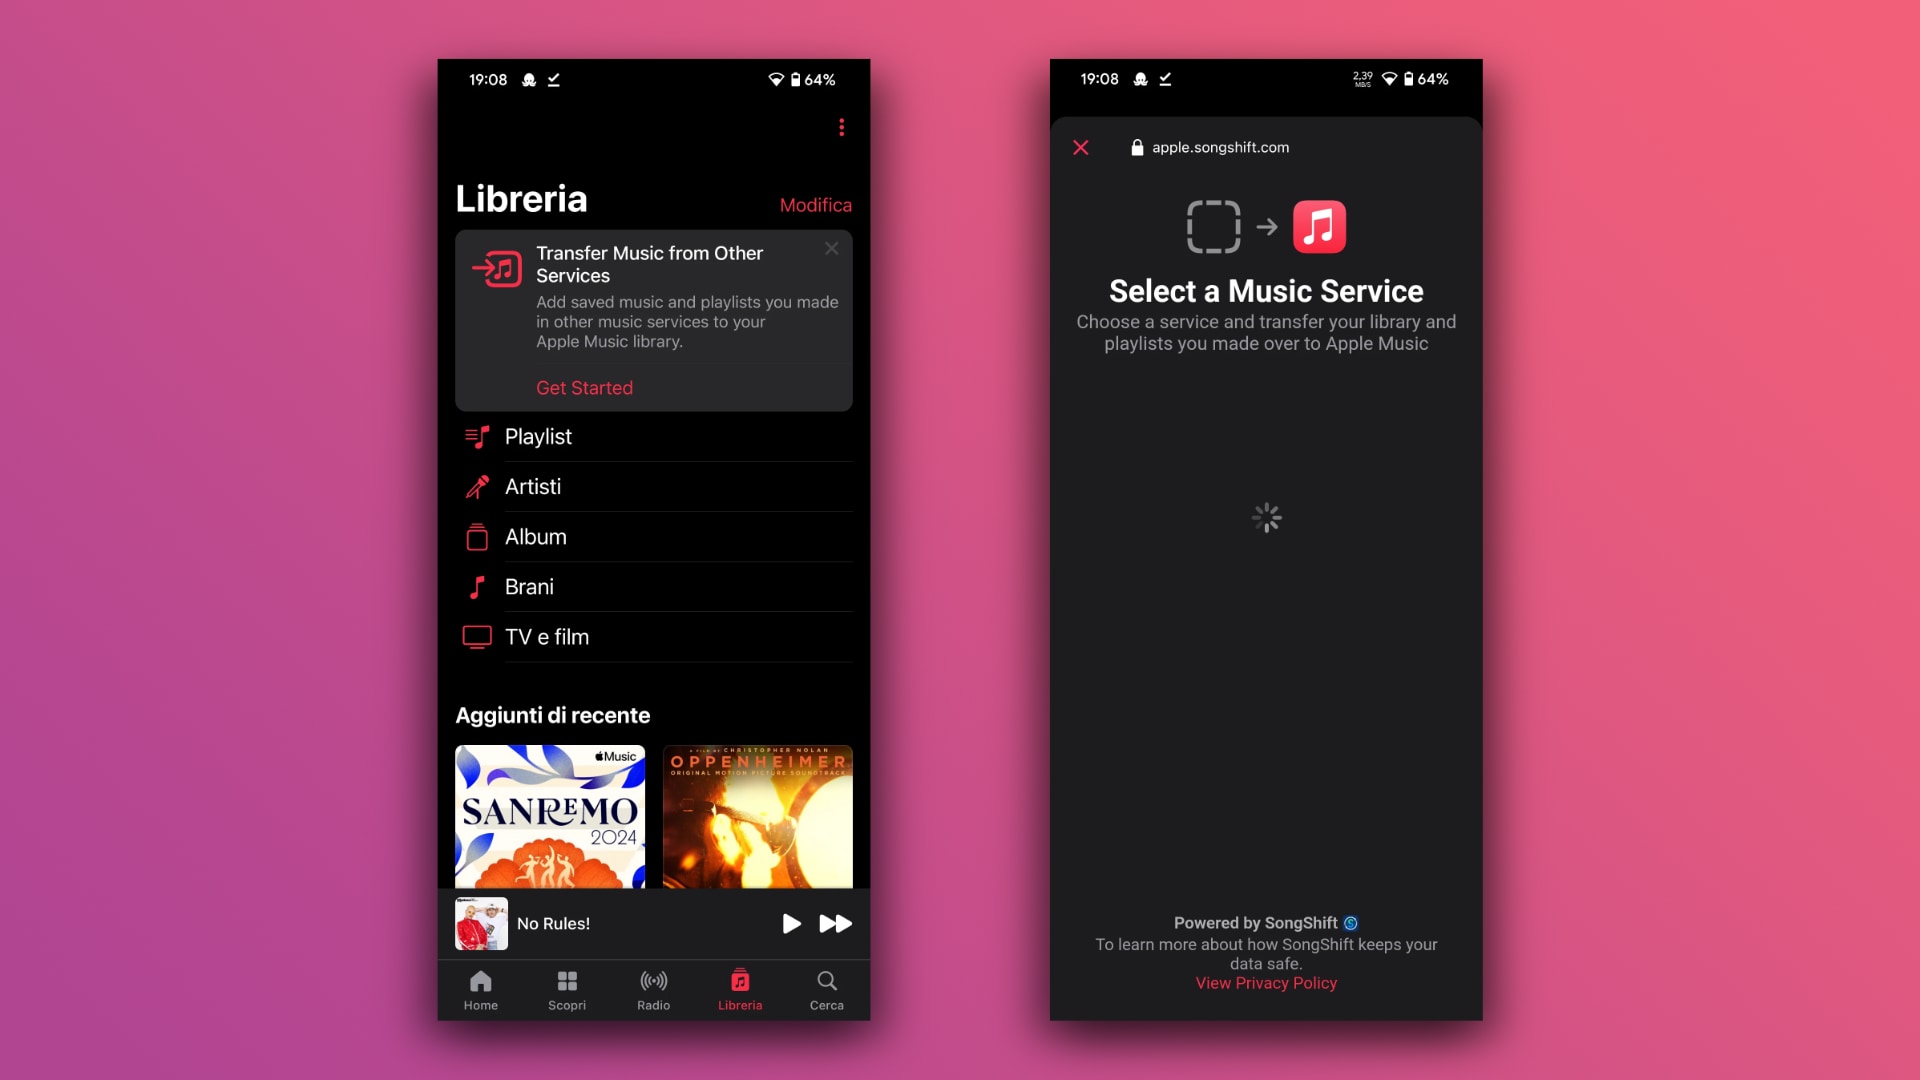 Apple Music is testing importing songs and playlists from Spotify and other services